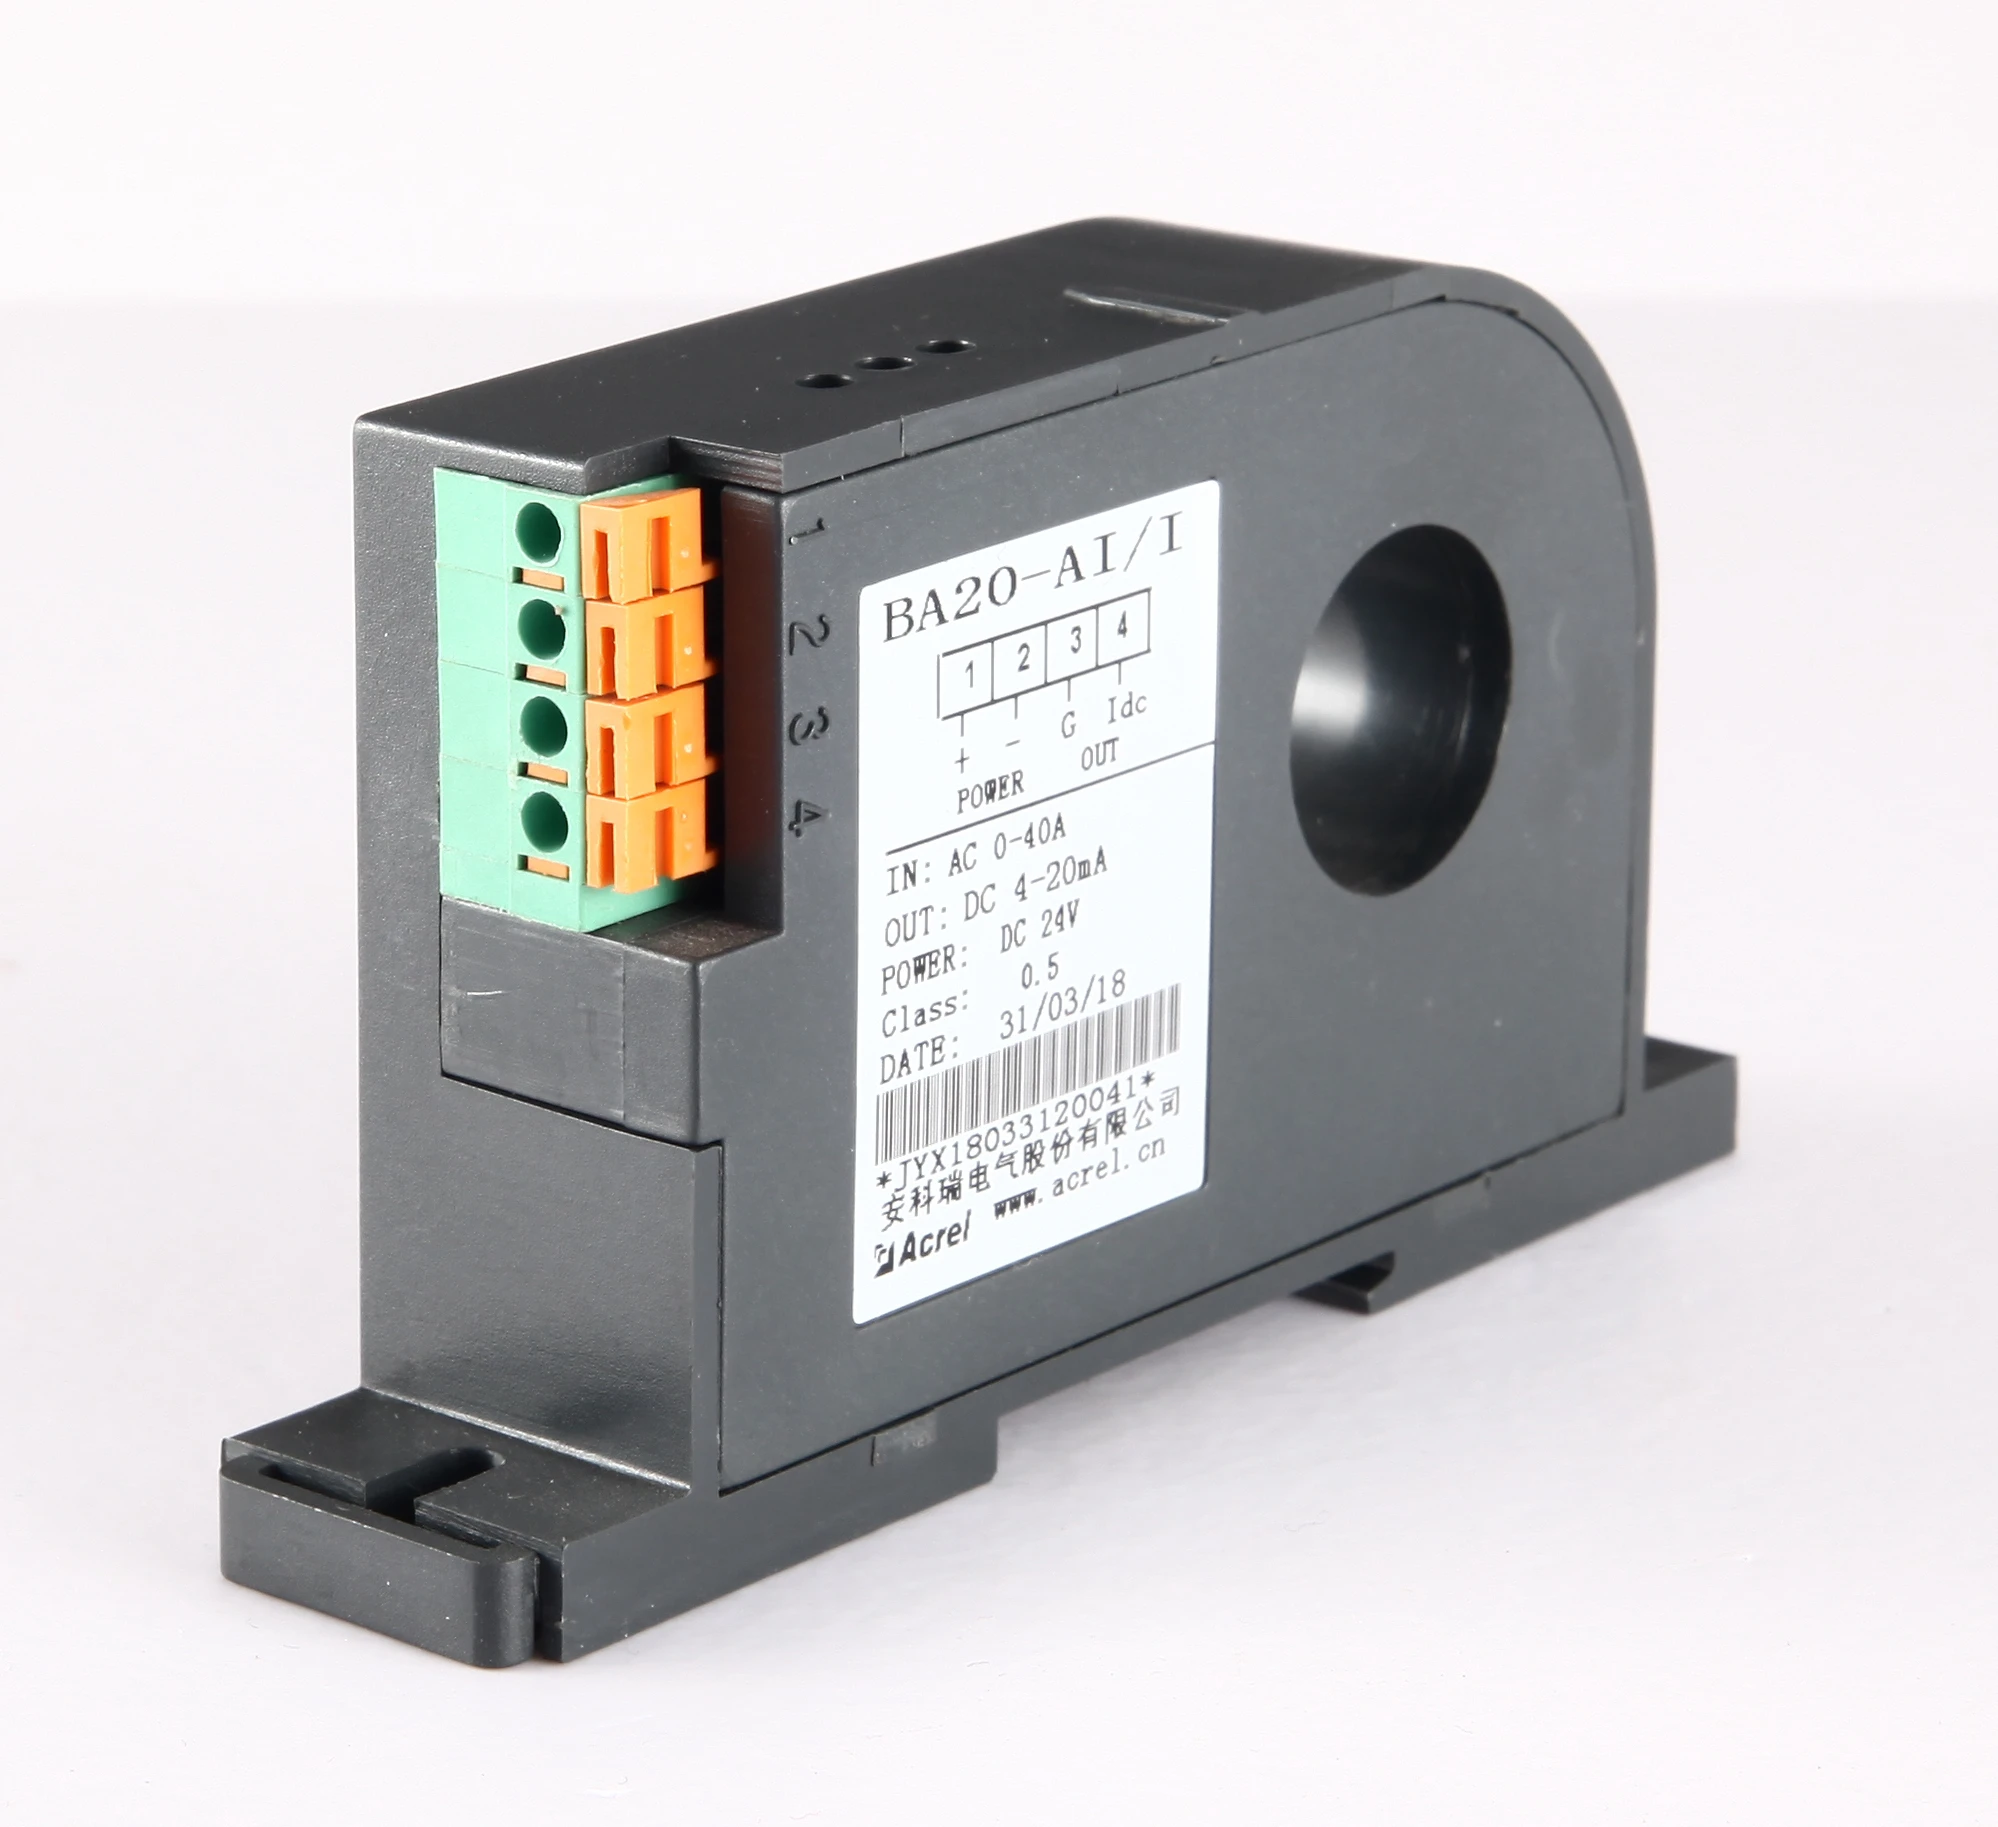 

BA series BA20-AI/V current transmitter mainly detects the leakage current of the electrical system